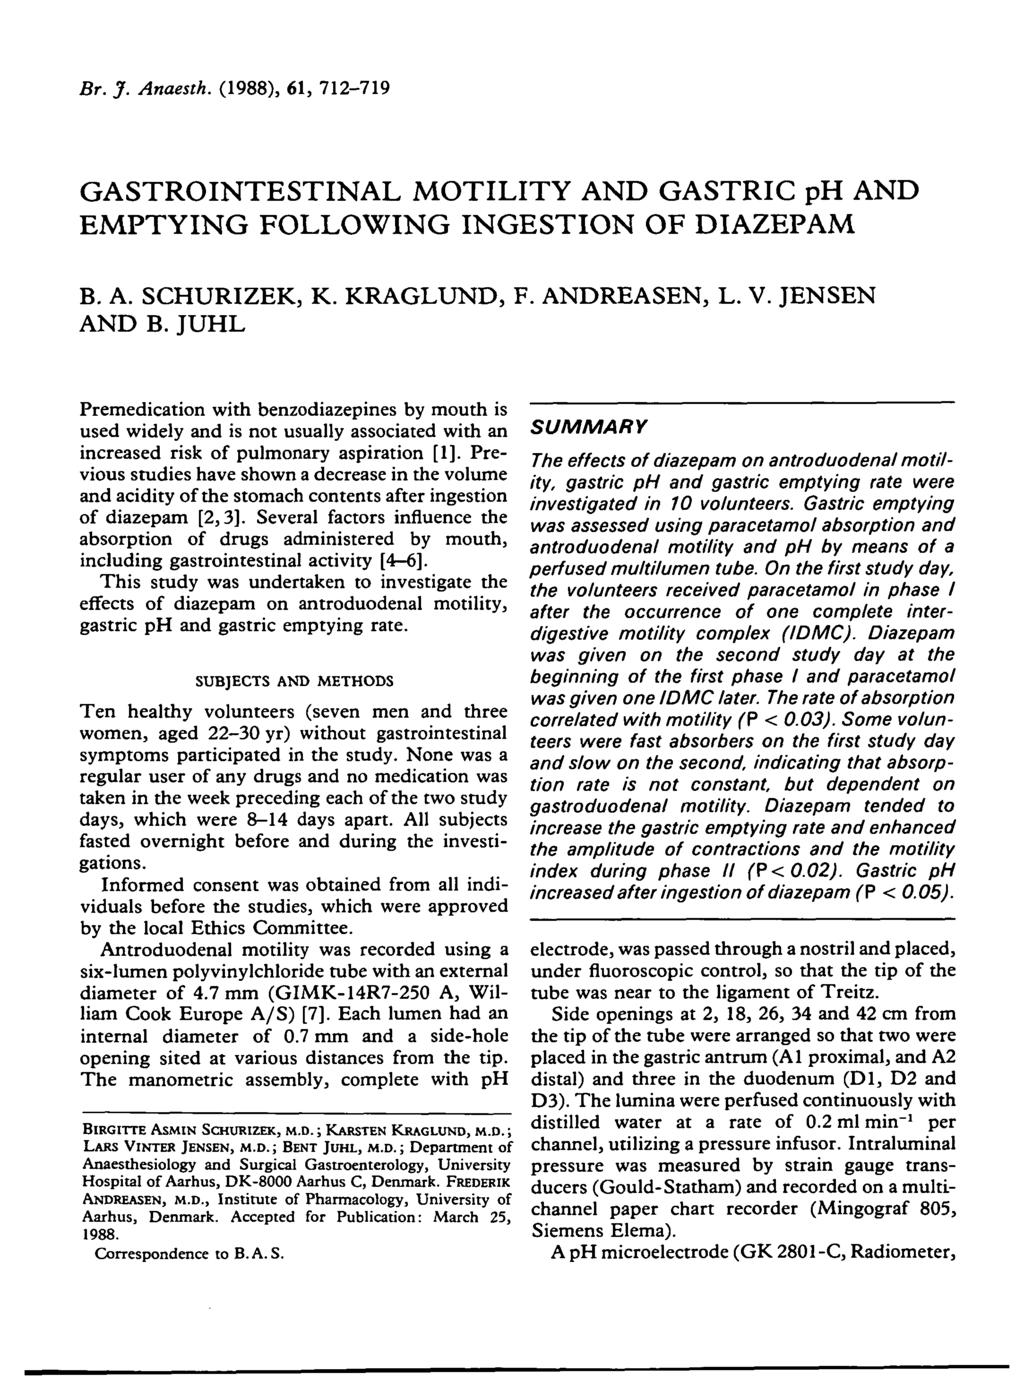 Br. J. Anaesth. (1988), 61, 712-719 GASTROINTESTINAL MOTILITY AND GASTRIC ph AND EMPTYING FOLLOWING INGESTION OF DIAZEPAM B. A. SCHURIZEK, K. KRAGLUND, F. ANDREASEN, L. V. JENSEN AND B.